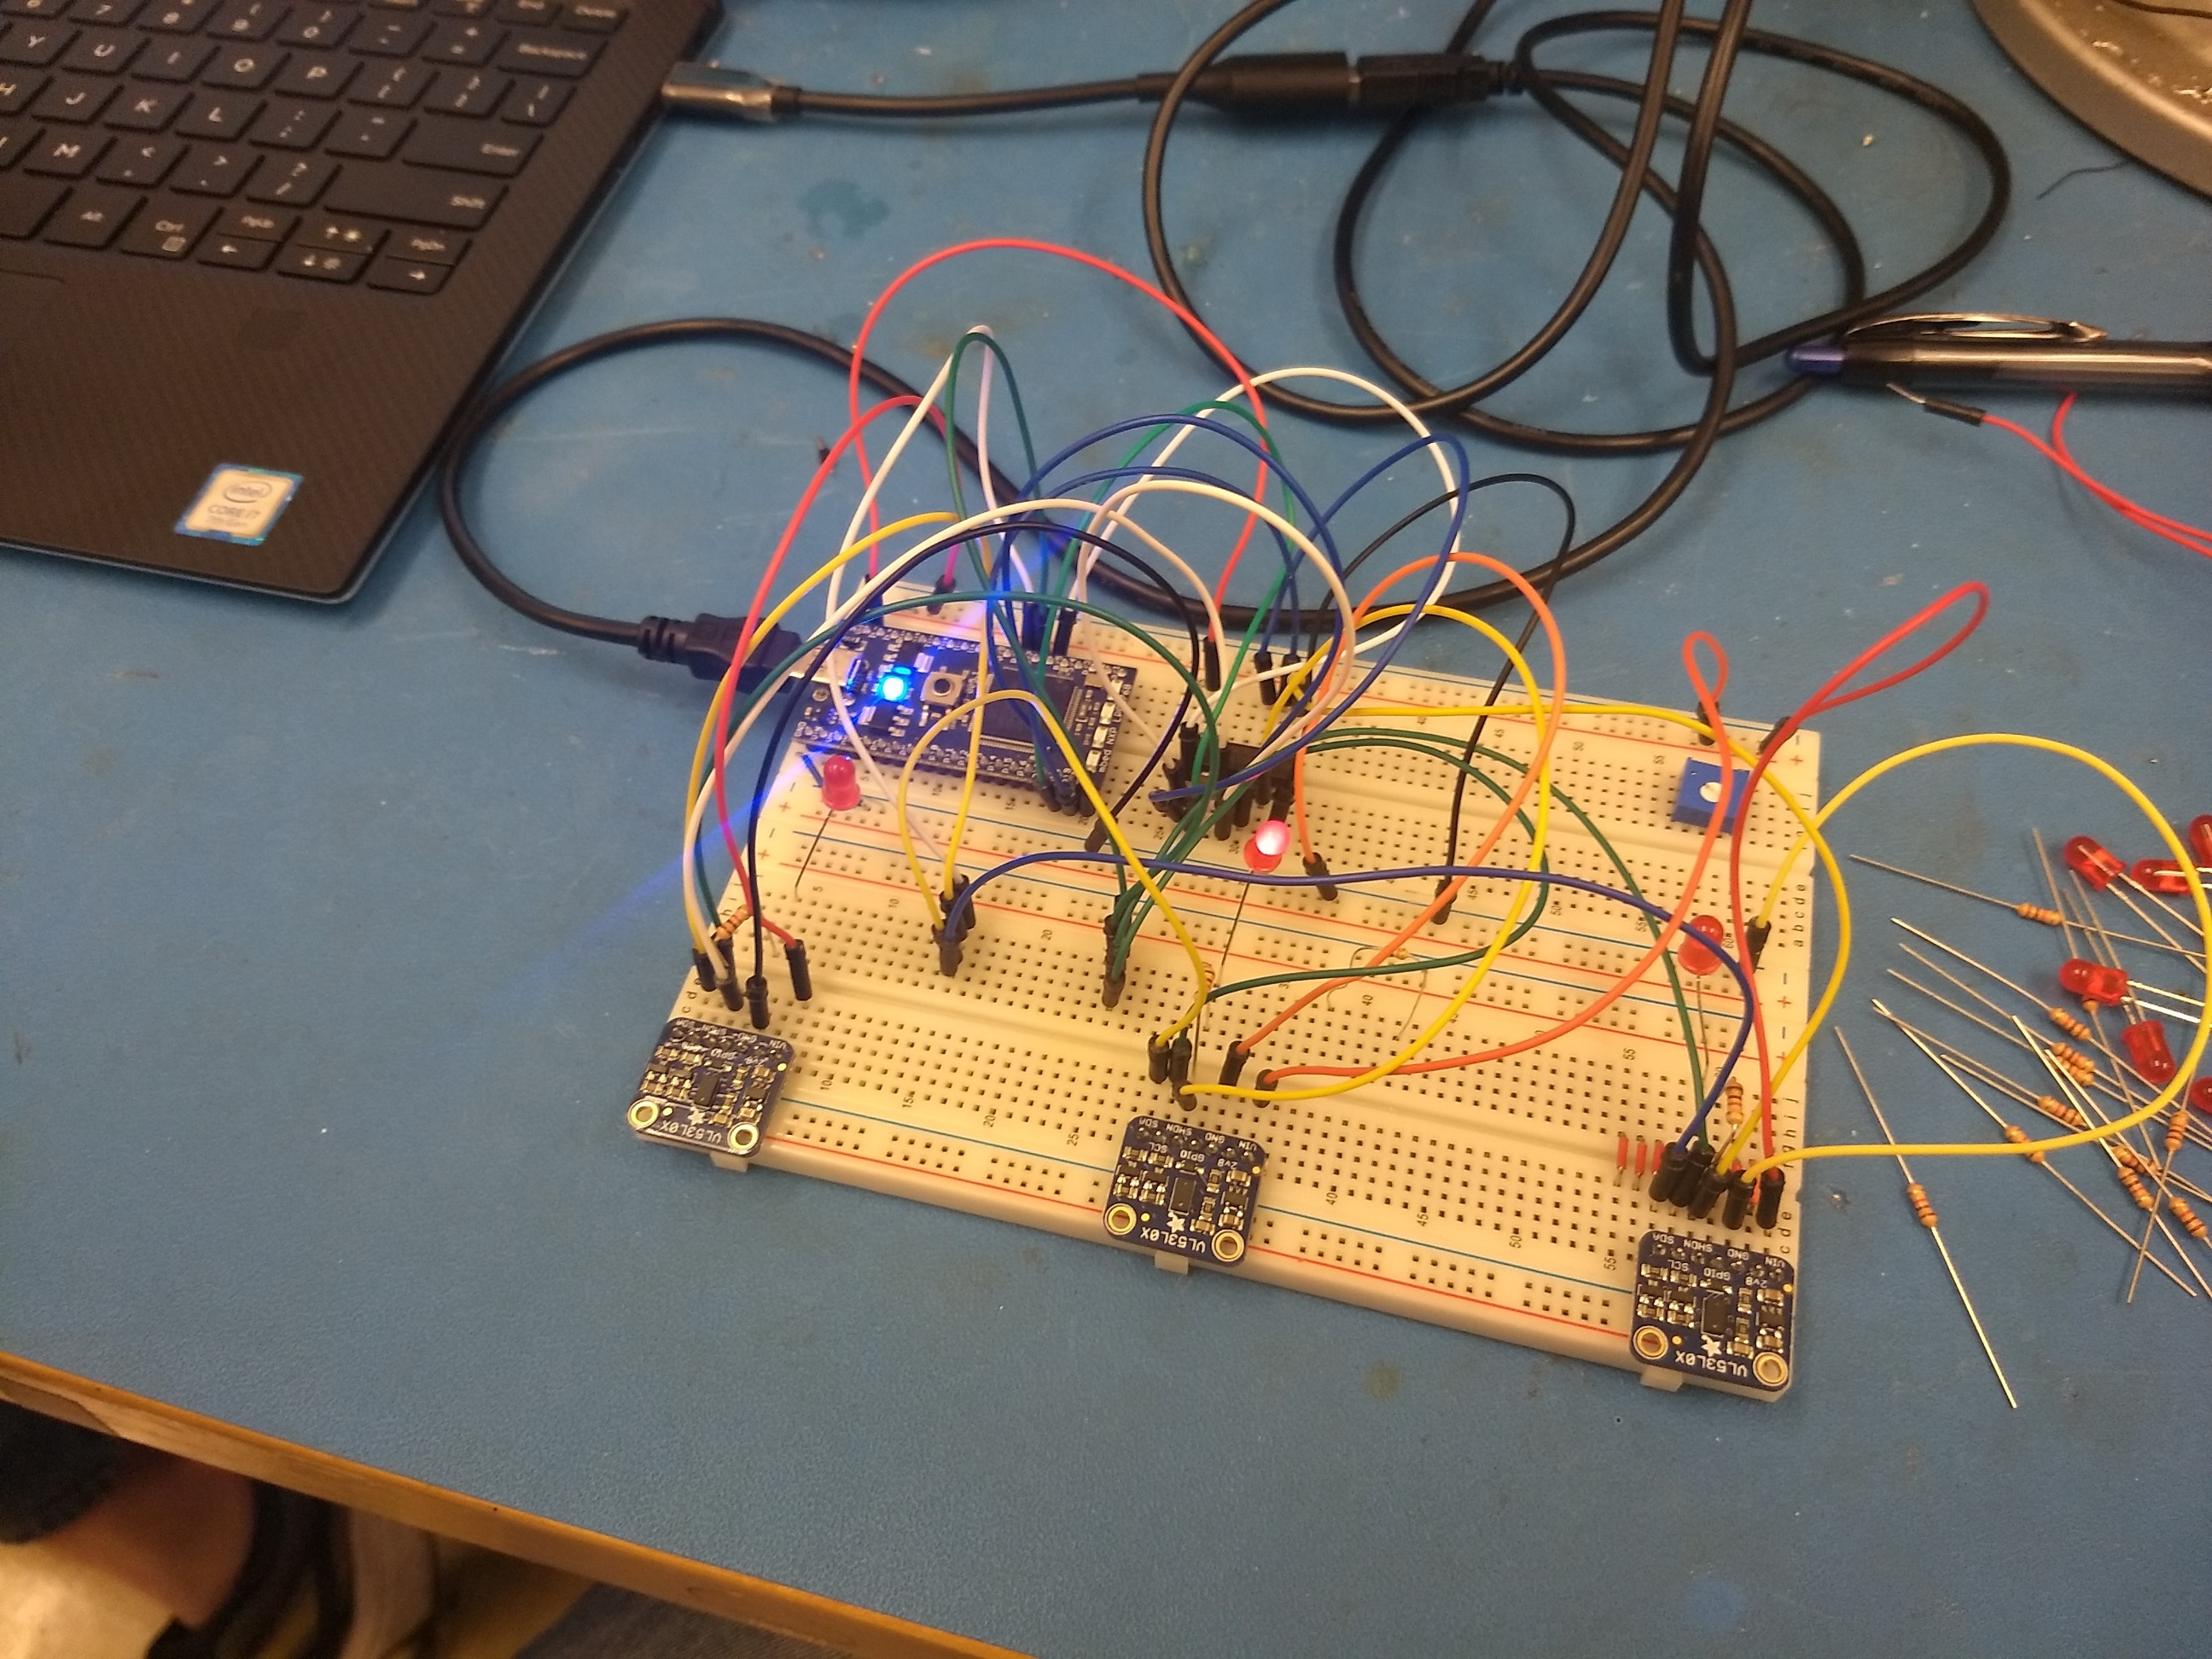 Circuit with LED indicating which sensor is communicating with Mbed